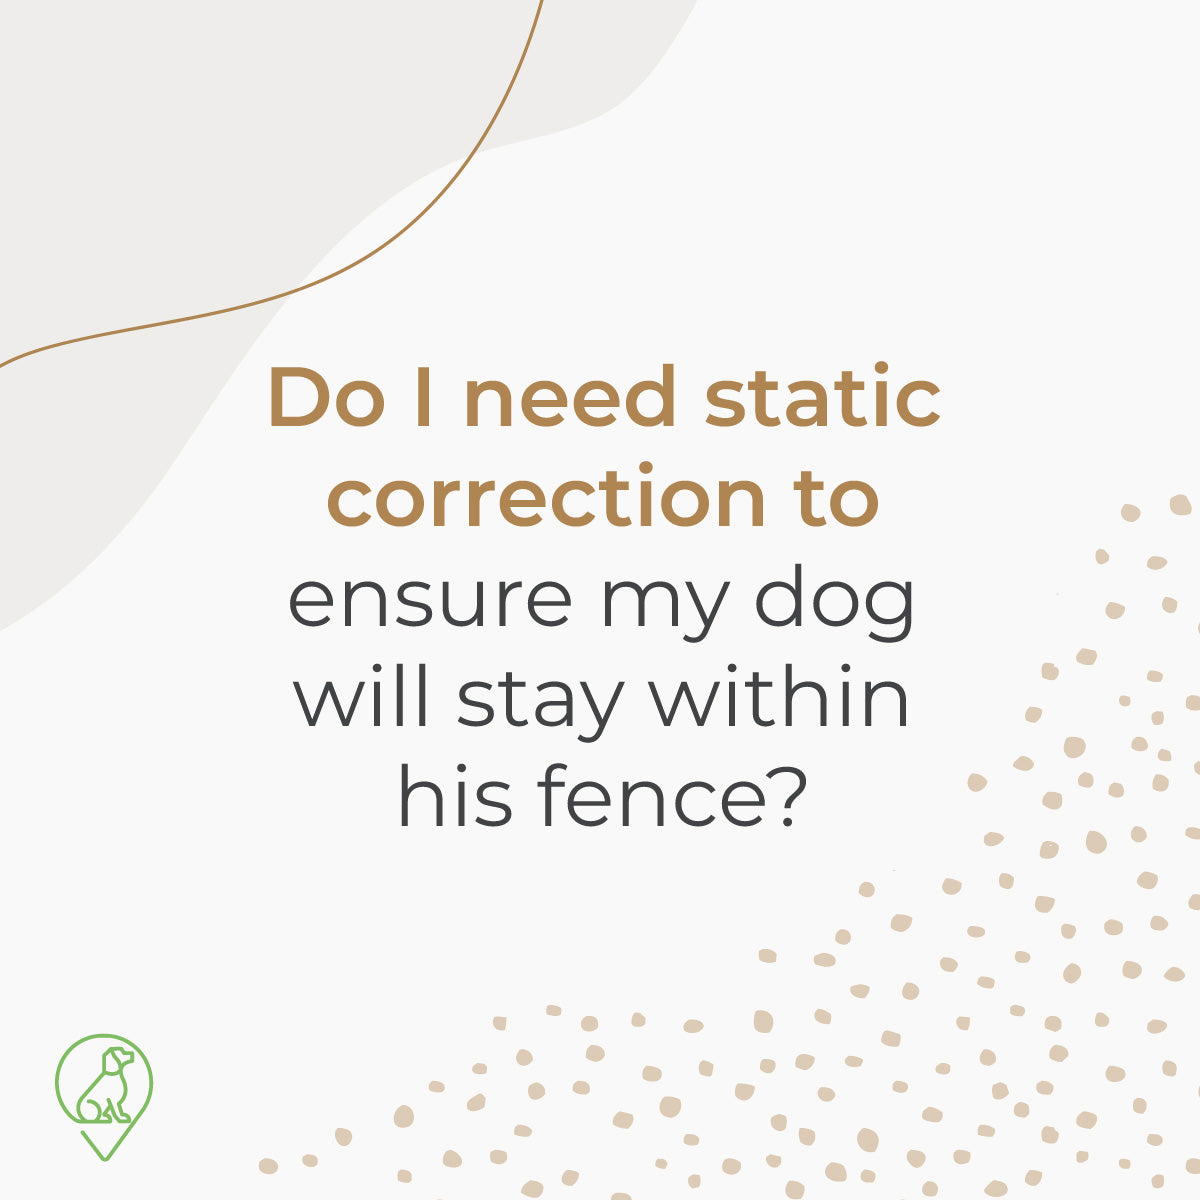 Do I need static correction to ensure my dog will stay within his fence?